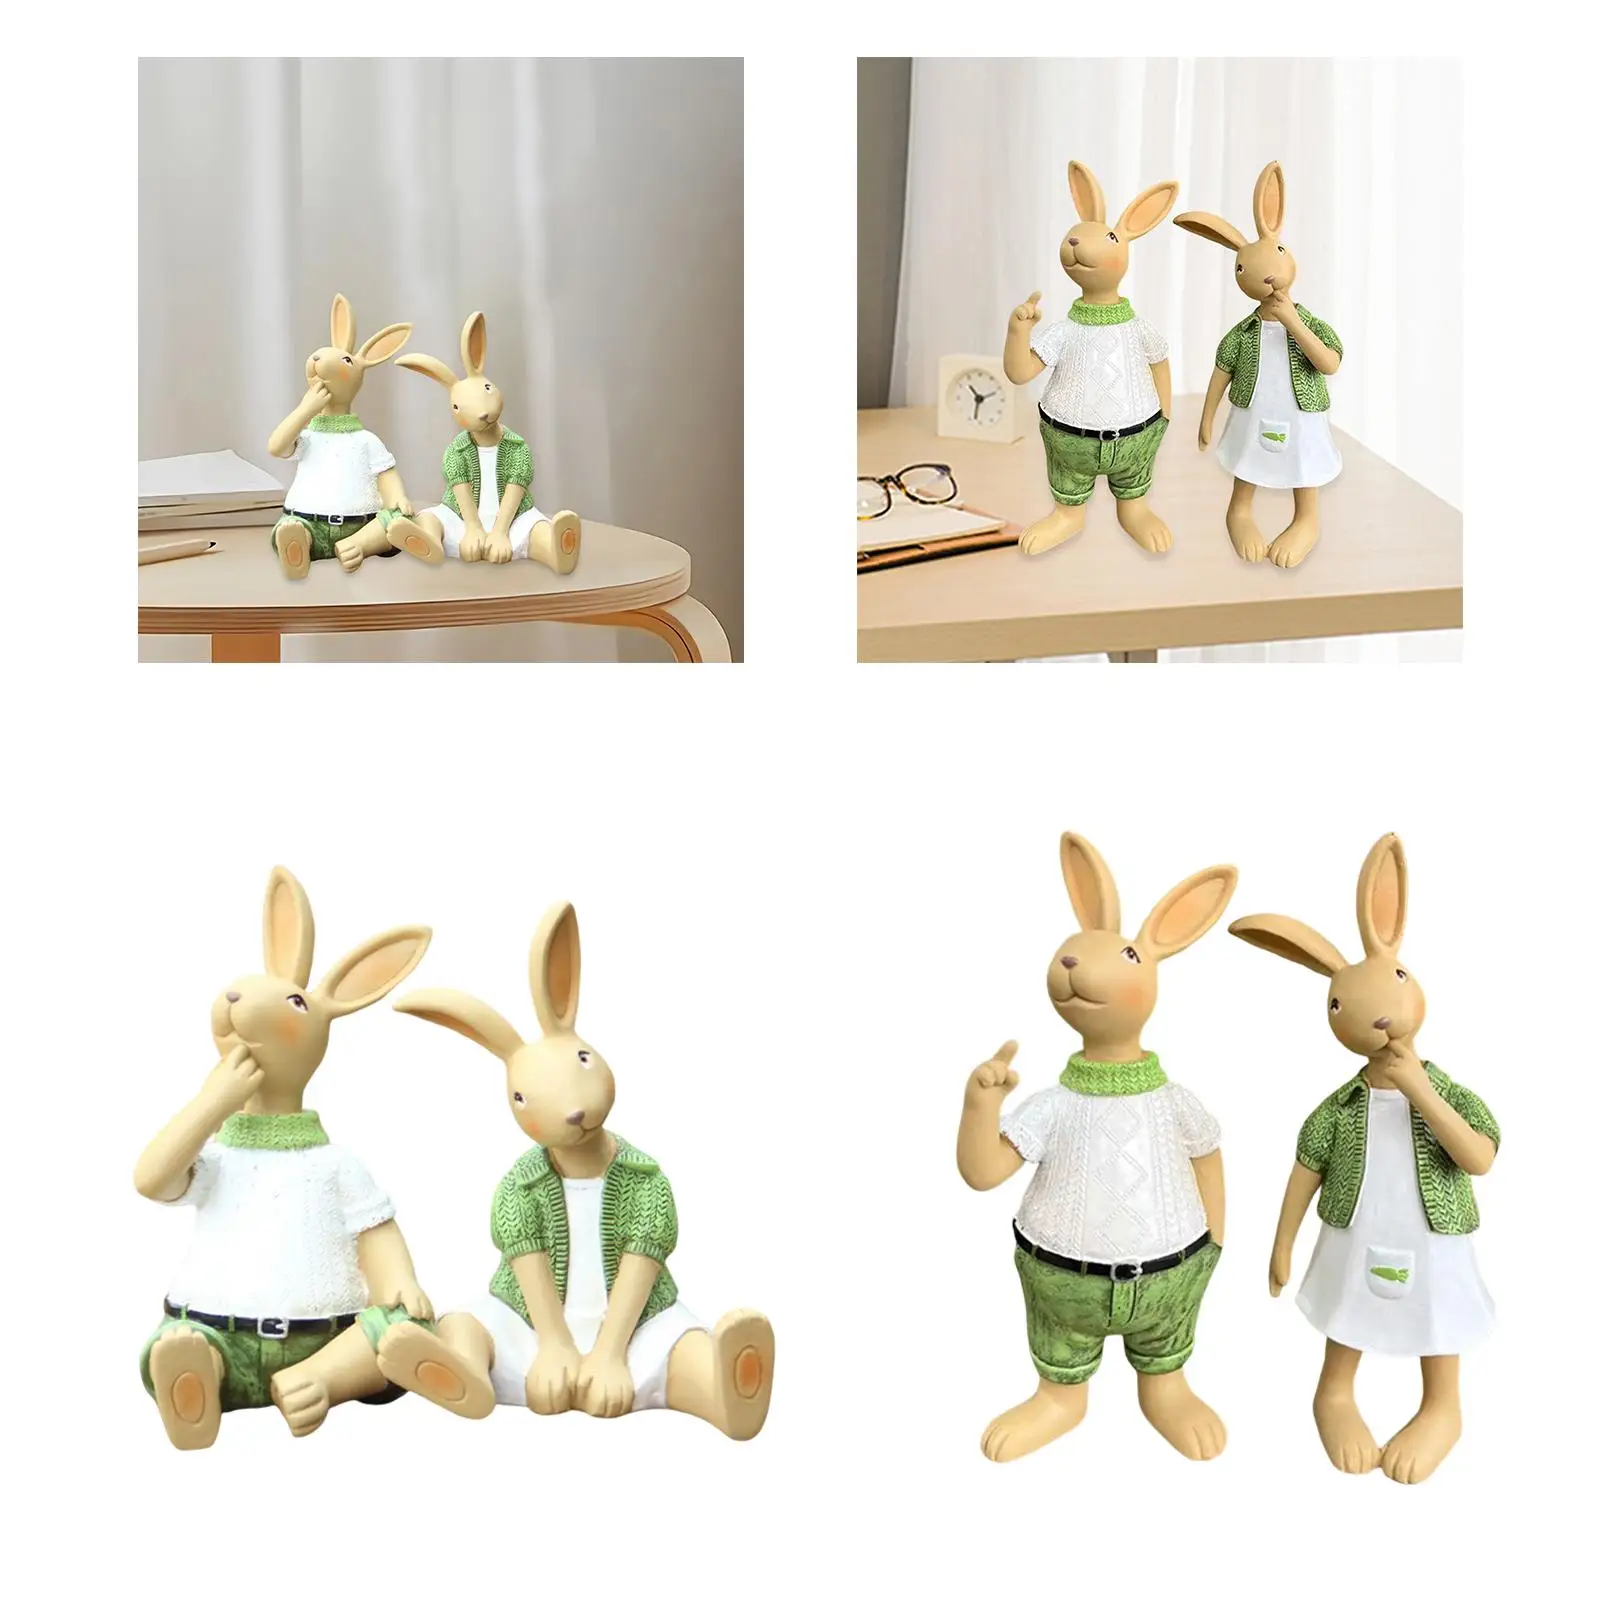 Easter Garden Statues Rabbit Party Decoration Animal Figurines Bunny Animal Figurines for Patio Lawn Backyard Tabletop Indoor